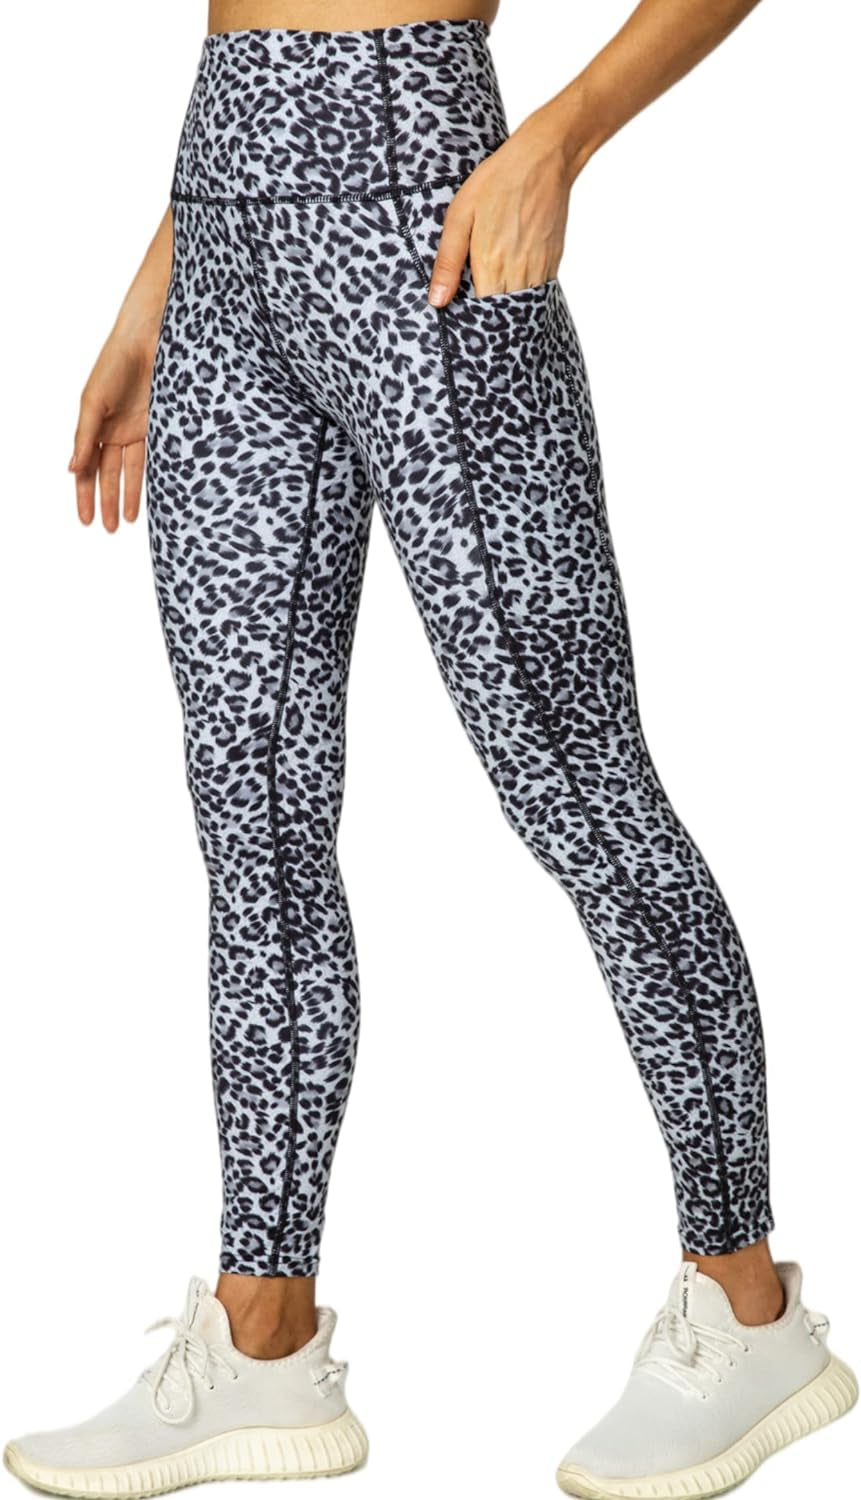 High-quality Women's Workout Leggings with Pockets, High Waisted